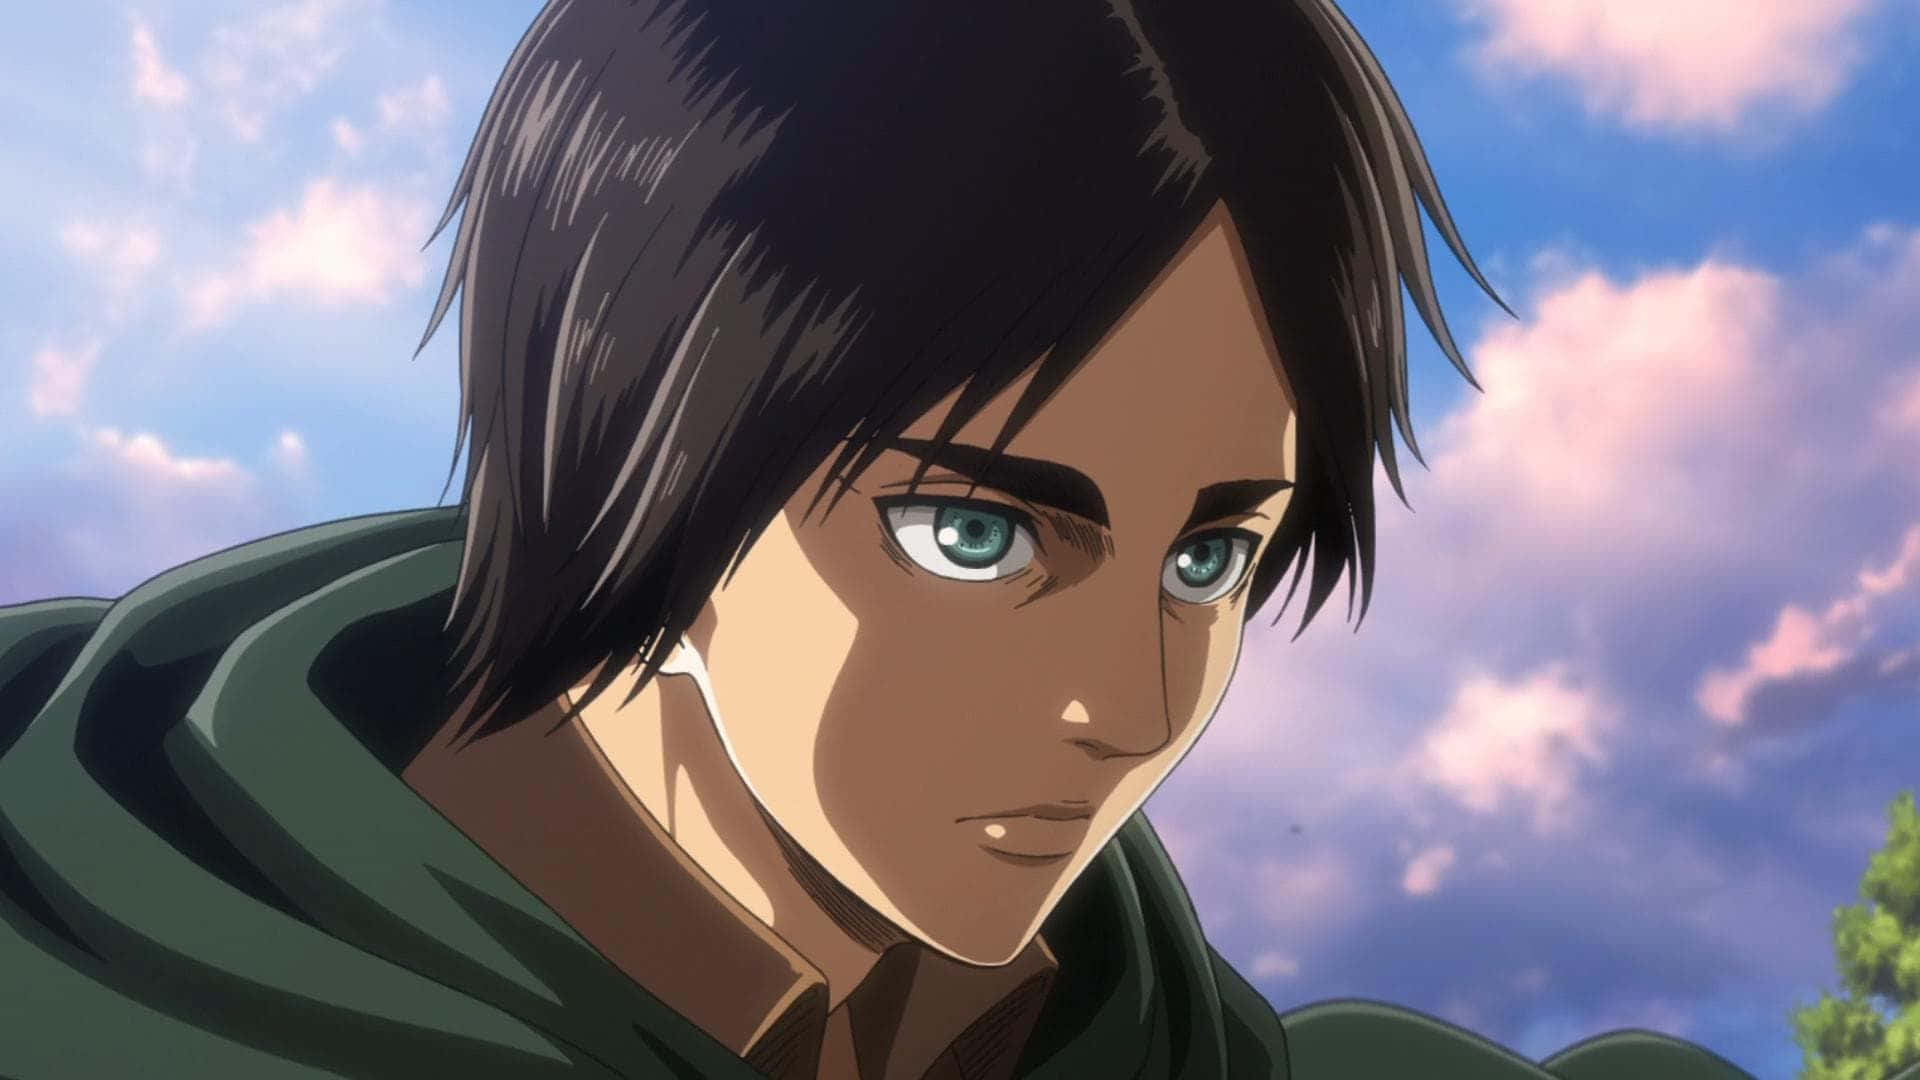 Download Eren Yeager Pfp With Clouds Wallpaper